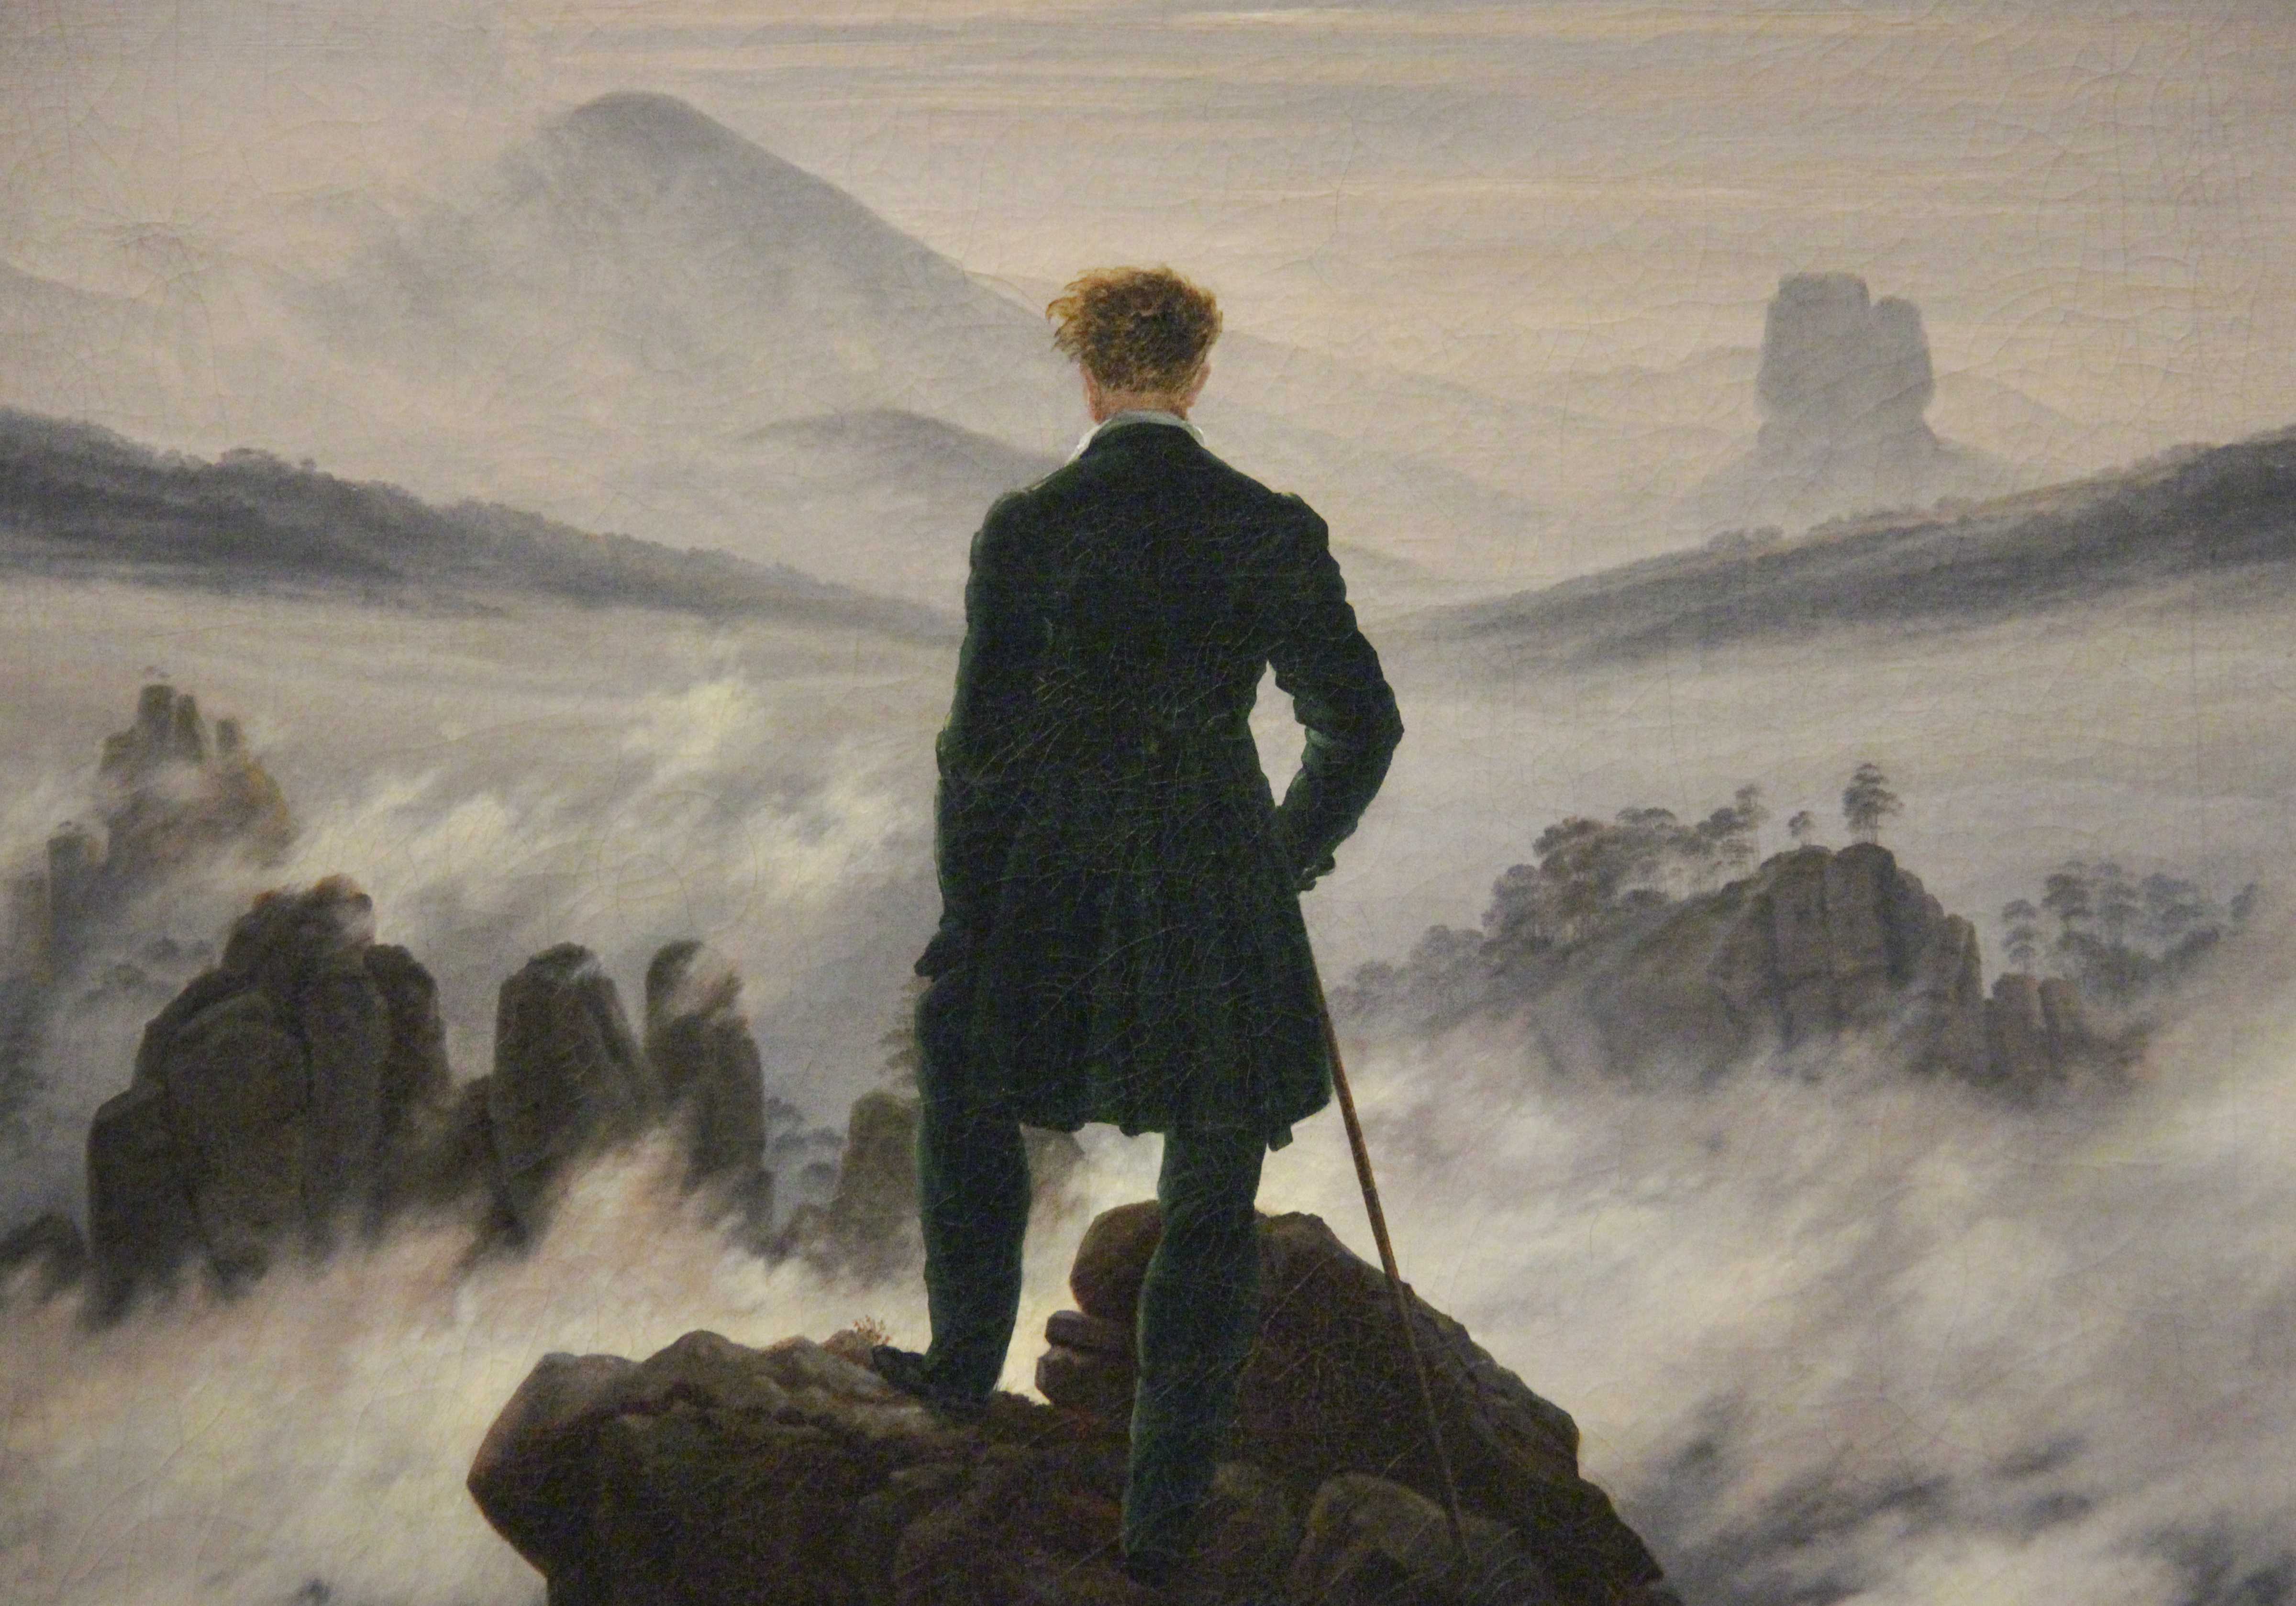 man in dark suit stands on mountain overlooking a sea of clouds